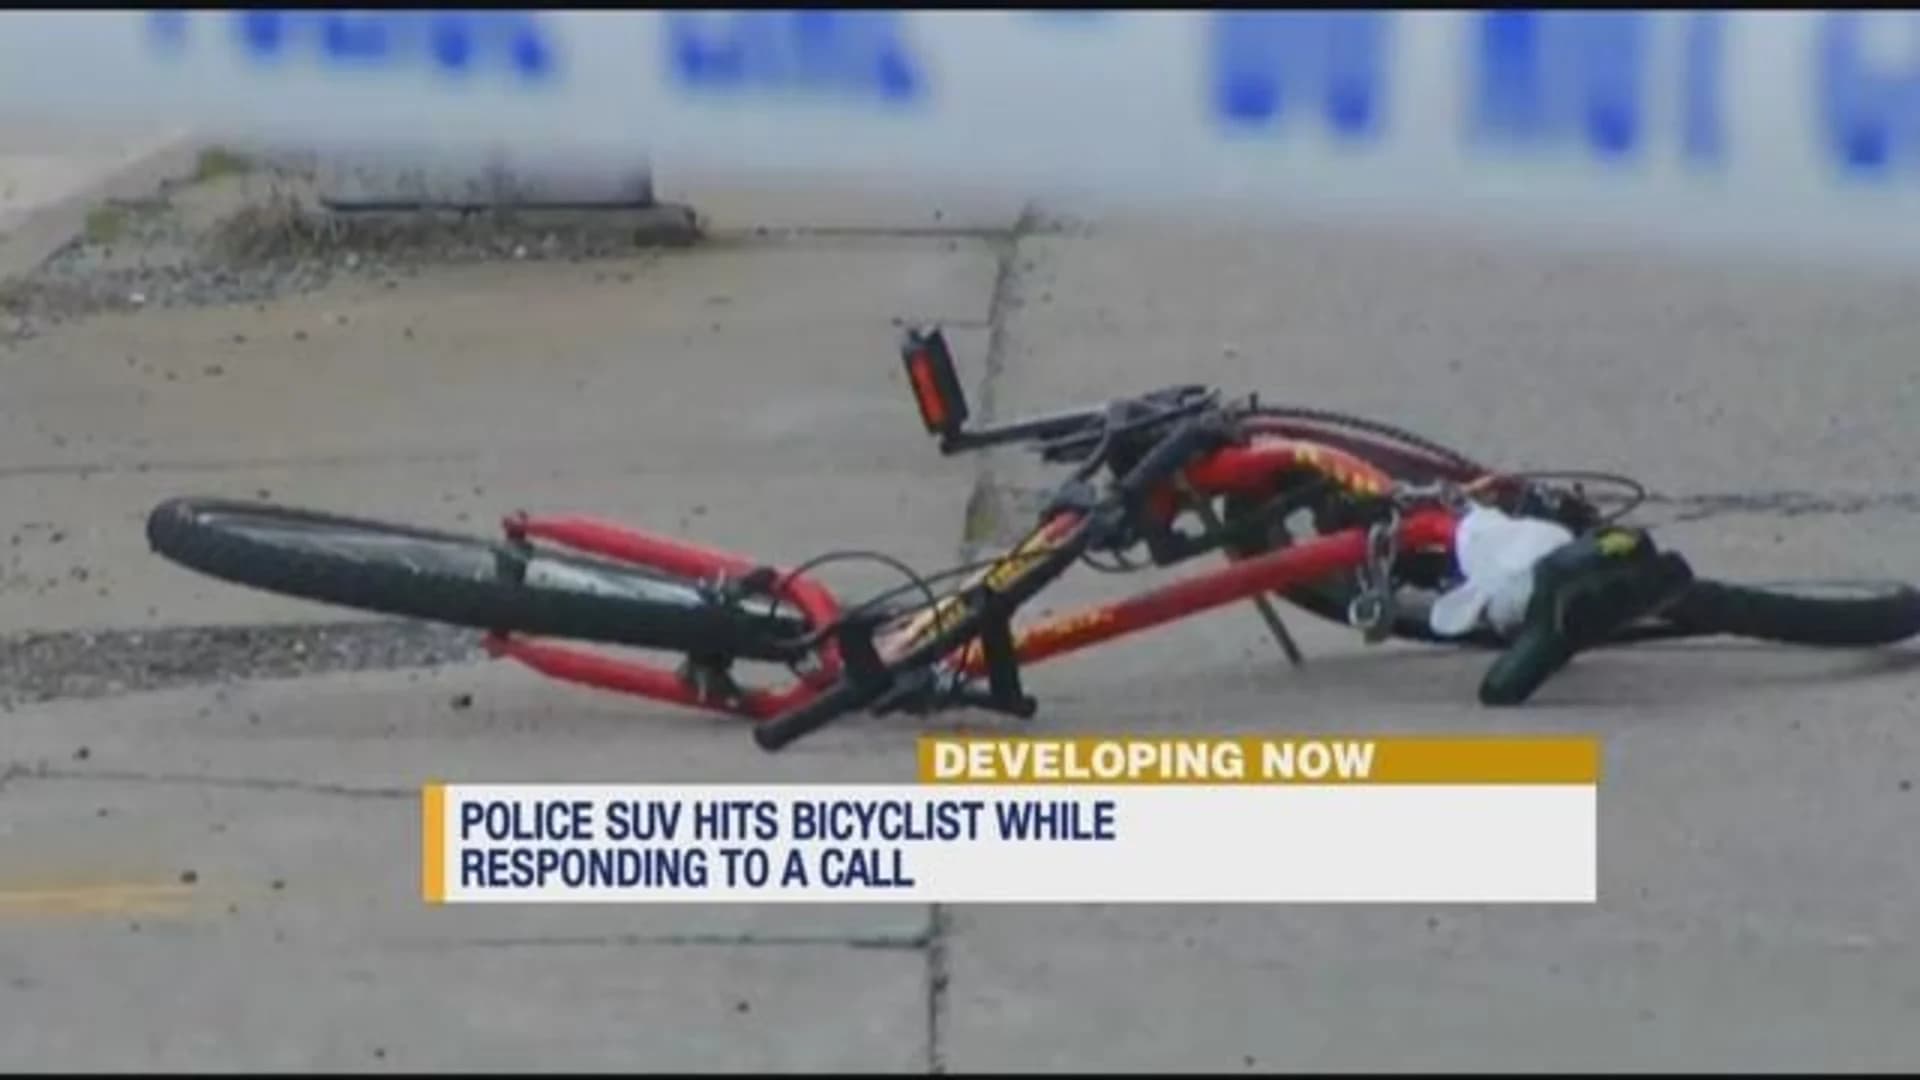 Bicyclist struck by NYPD cruiser while officers respond to call